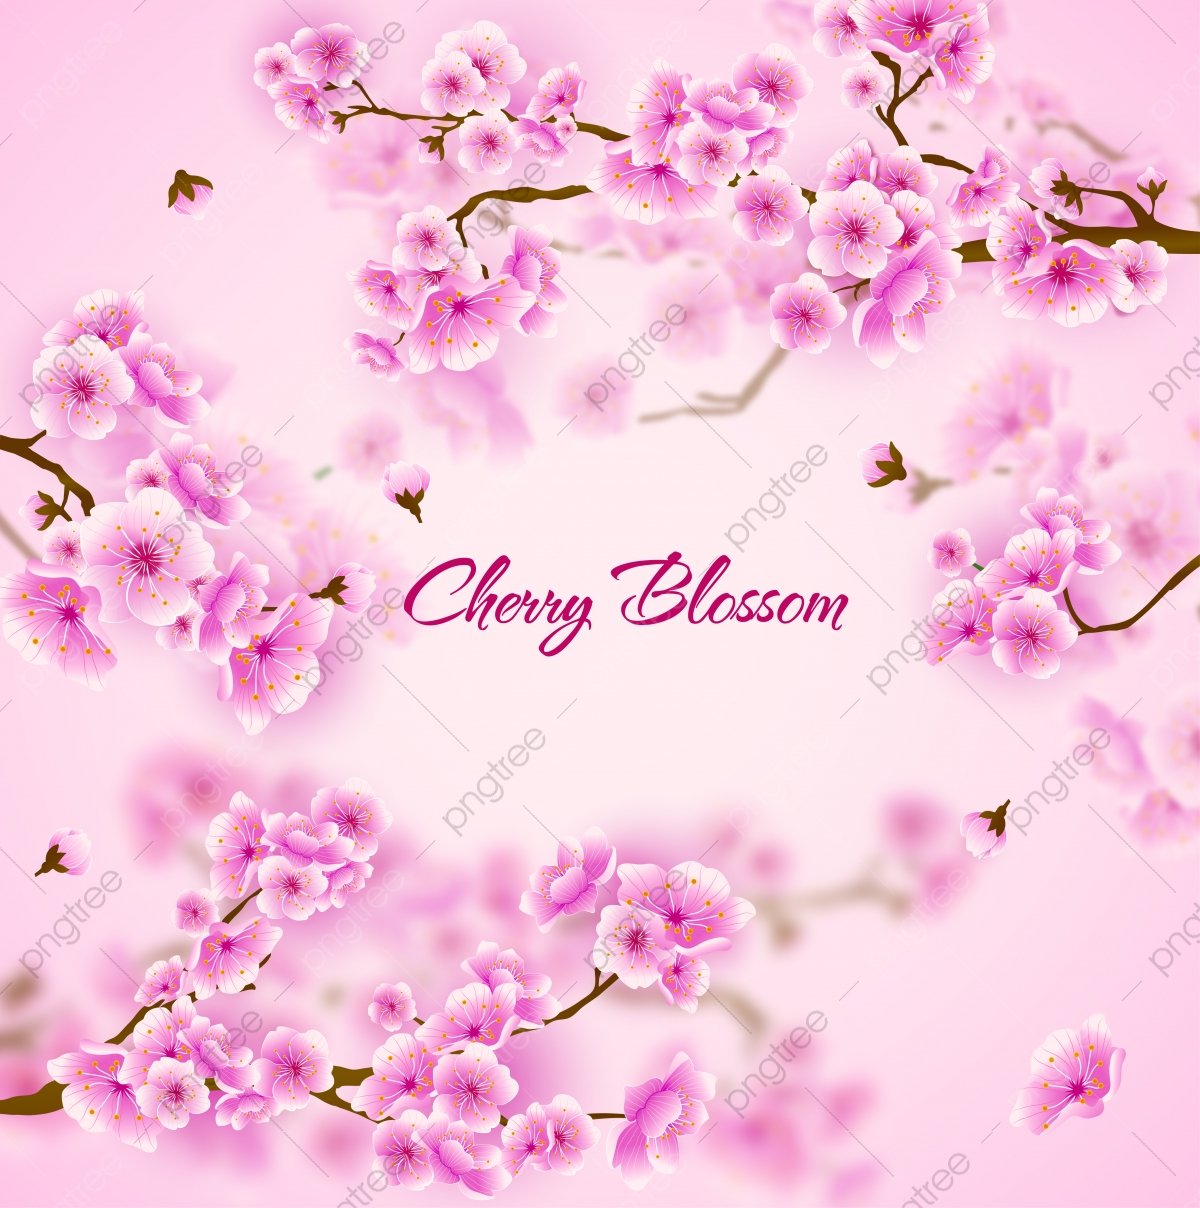 Pink Cherry Blossom Sakura Floral Background Orchid Flowers Wallpaper Spring Festival, Wedding, Greeting, Roses Background Image for Free Download